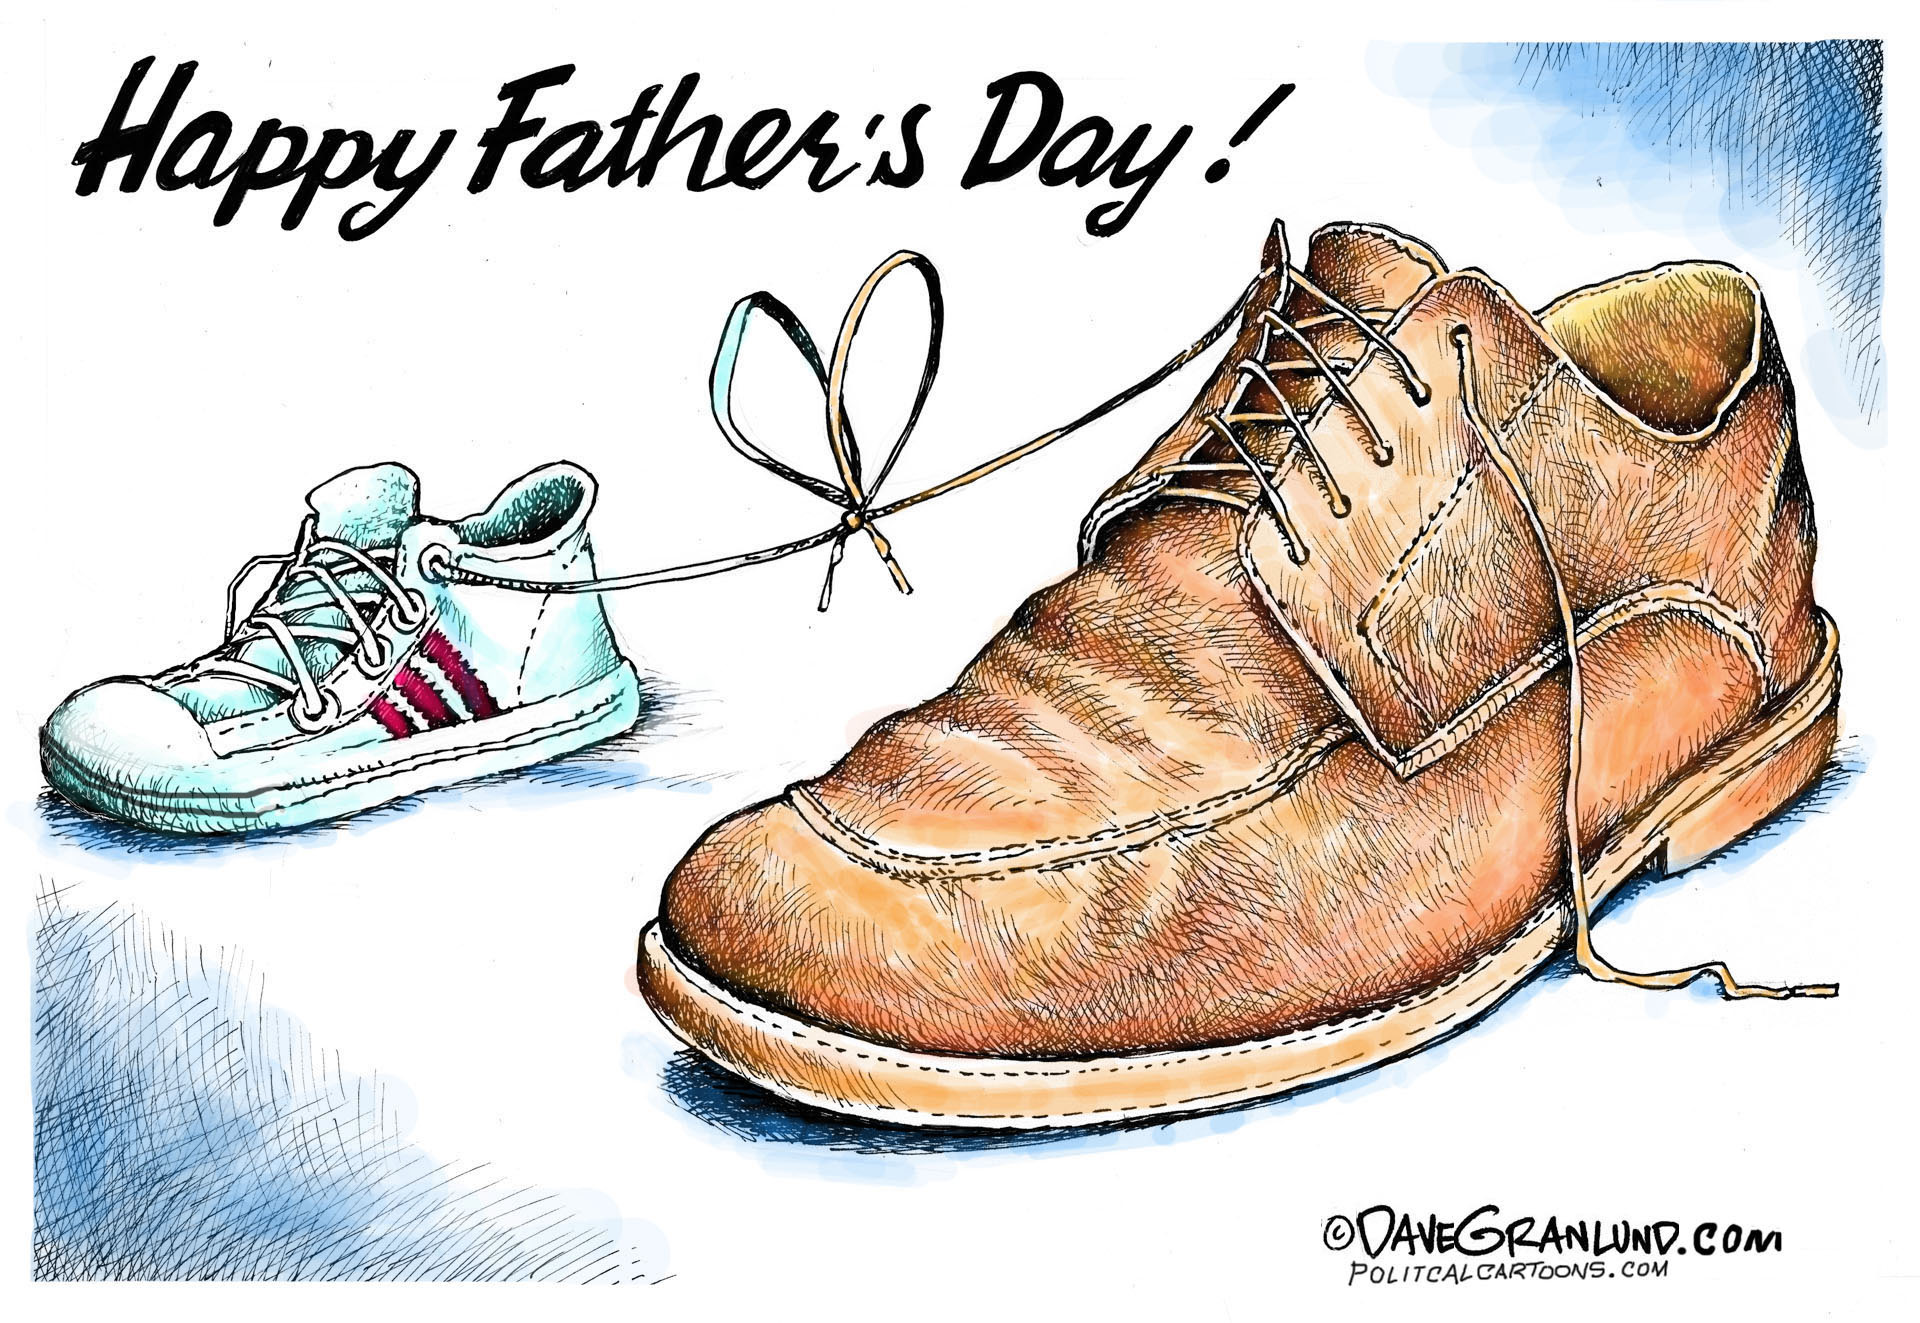 June 17: Father's Day